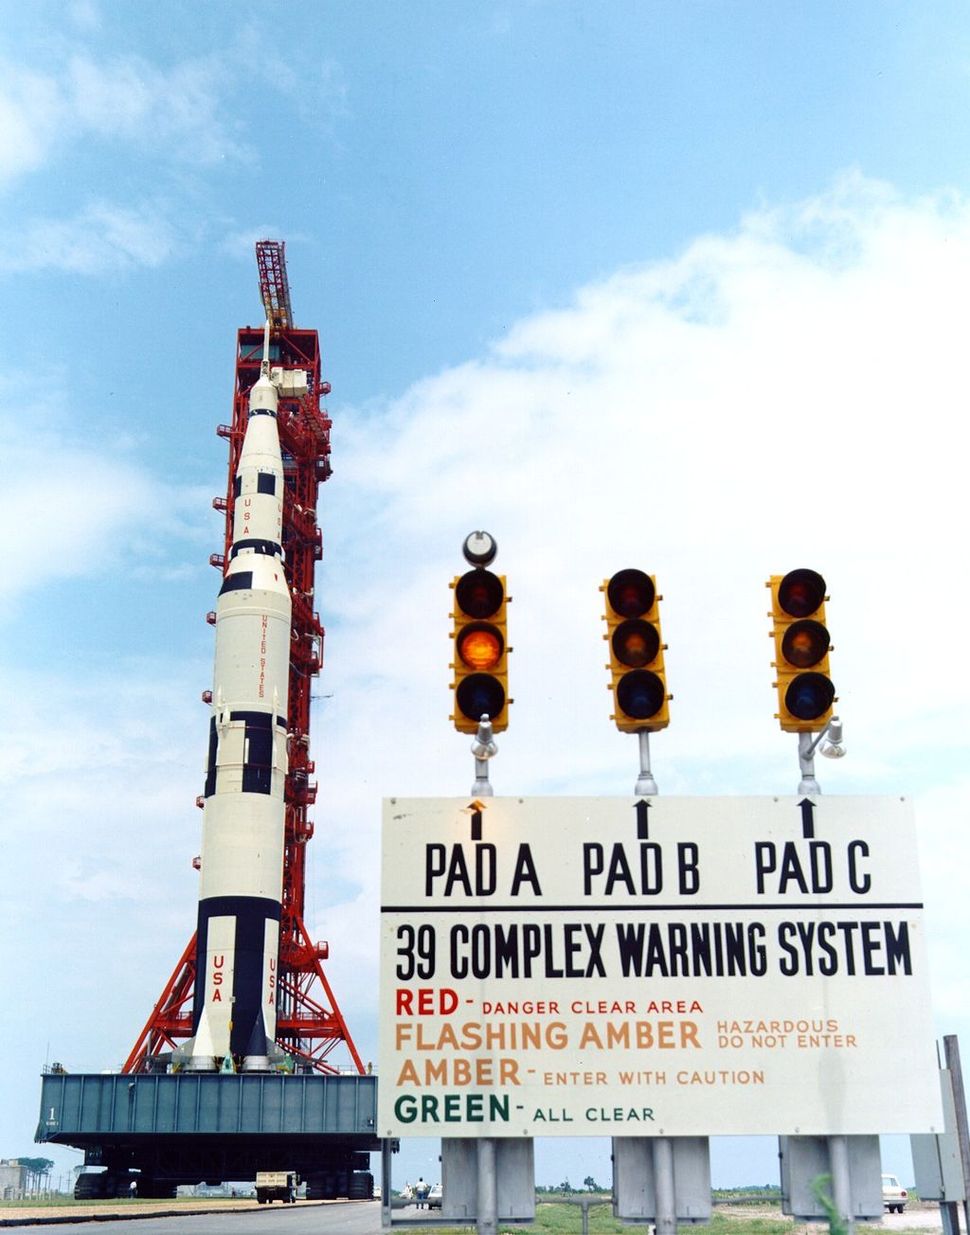 In Photos NASA's Historic Launch Pad 39A, from Apollo to Shuttle to